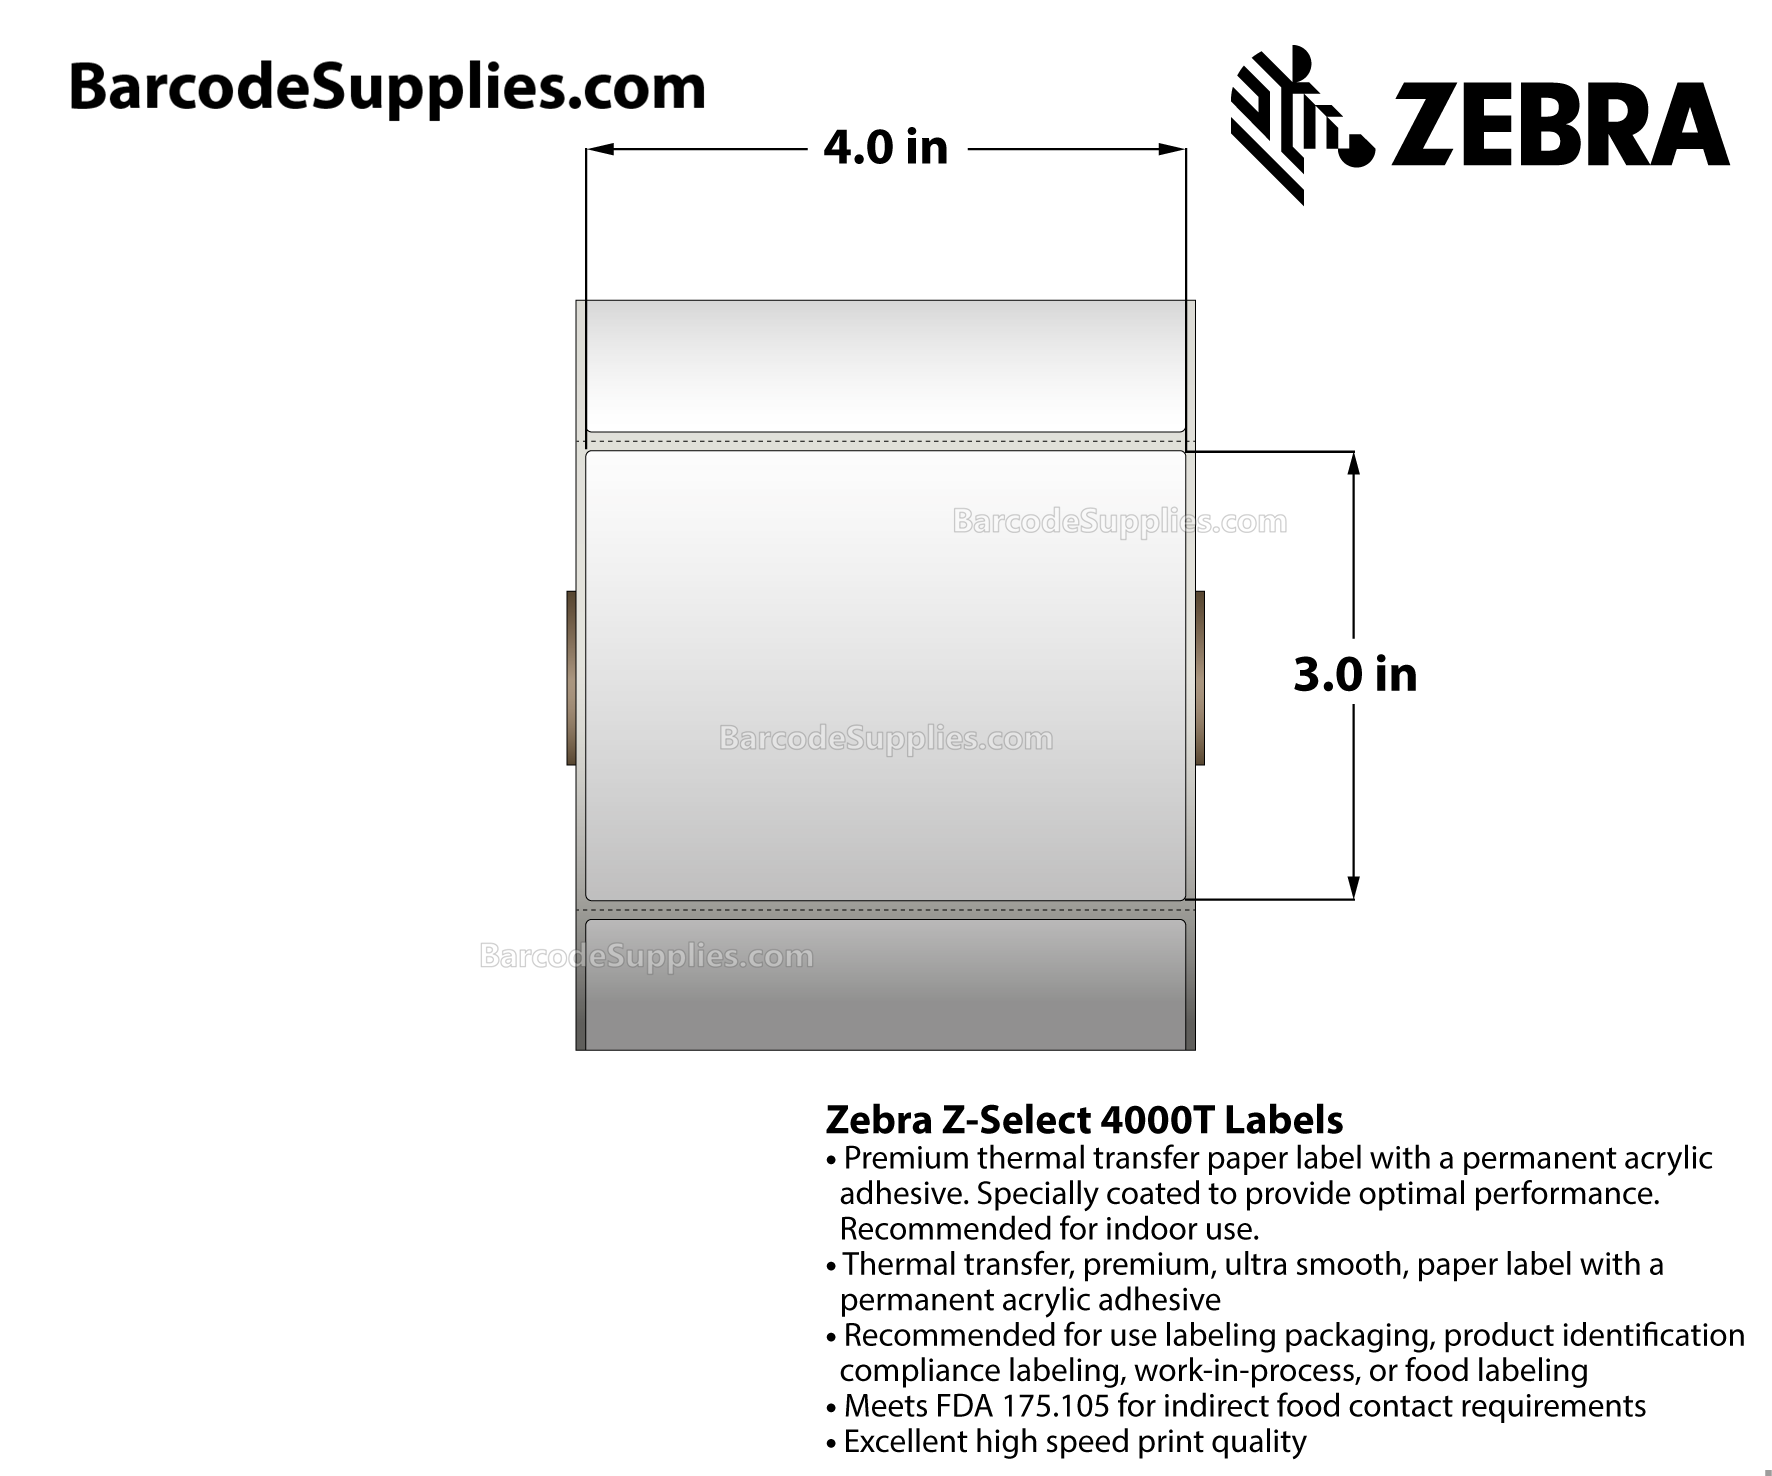 4 x 3 Thermal Transfer White Z-Select 4000T Labels With Permanent Adhesive - Perforated - 930 Labels Per Roll - Carton Of 12 Rolls - 11160 Labels Total - MPN: 800274-305